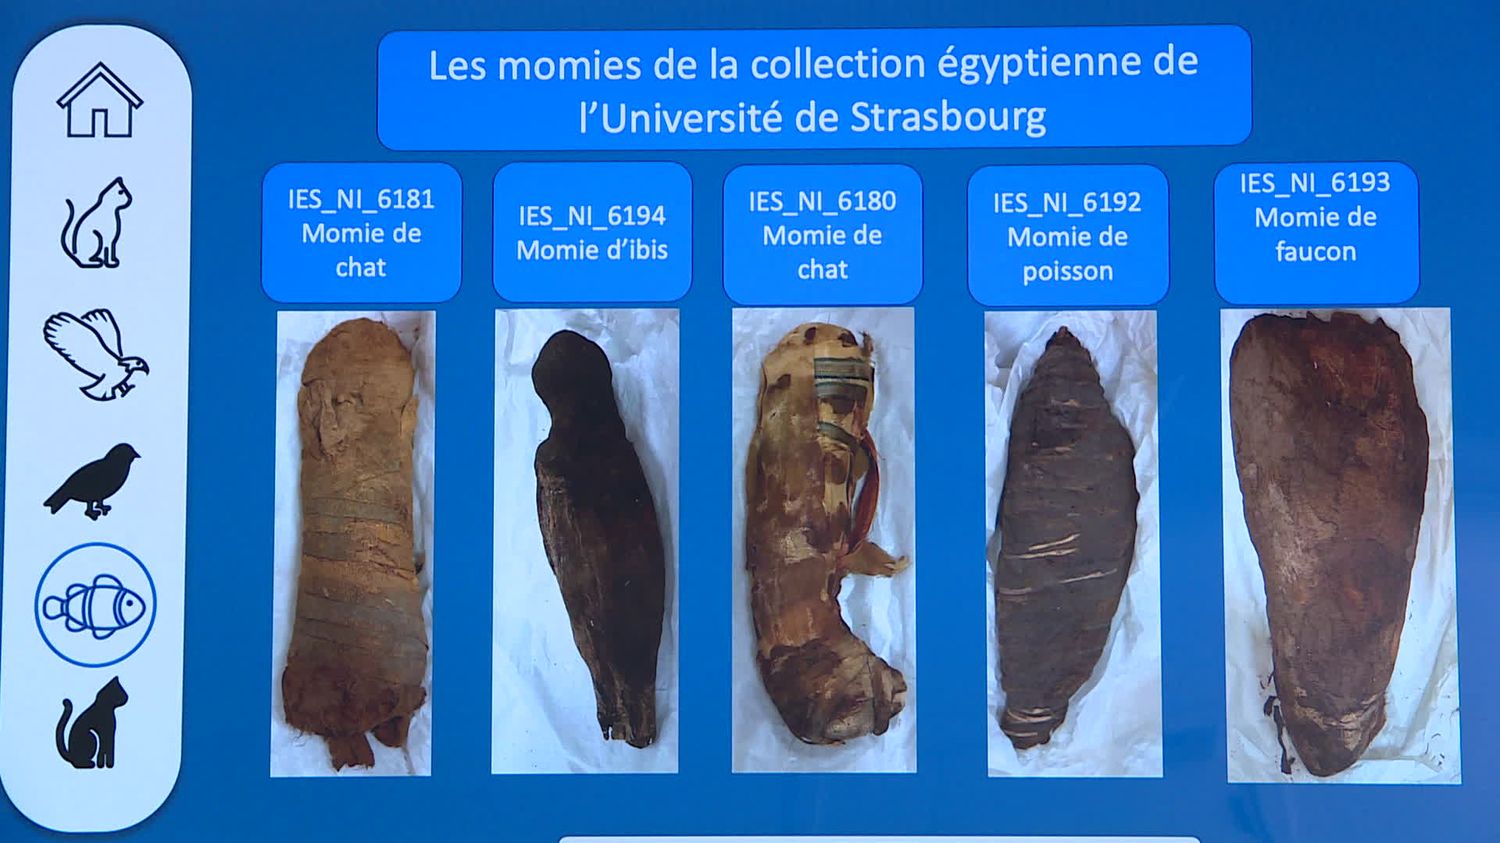 In Strasbourg, five Egyptian animal mummies reveal their secrets with the help of X-rays